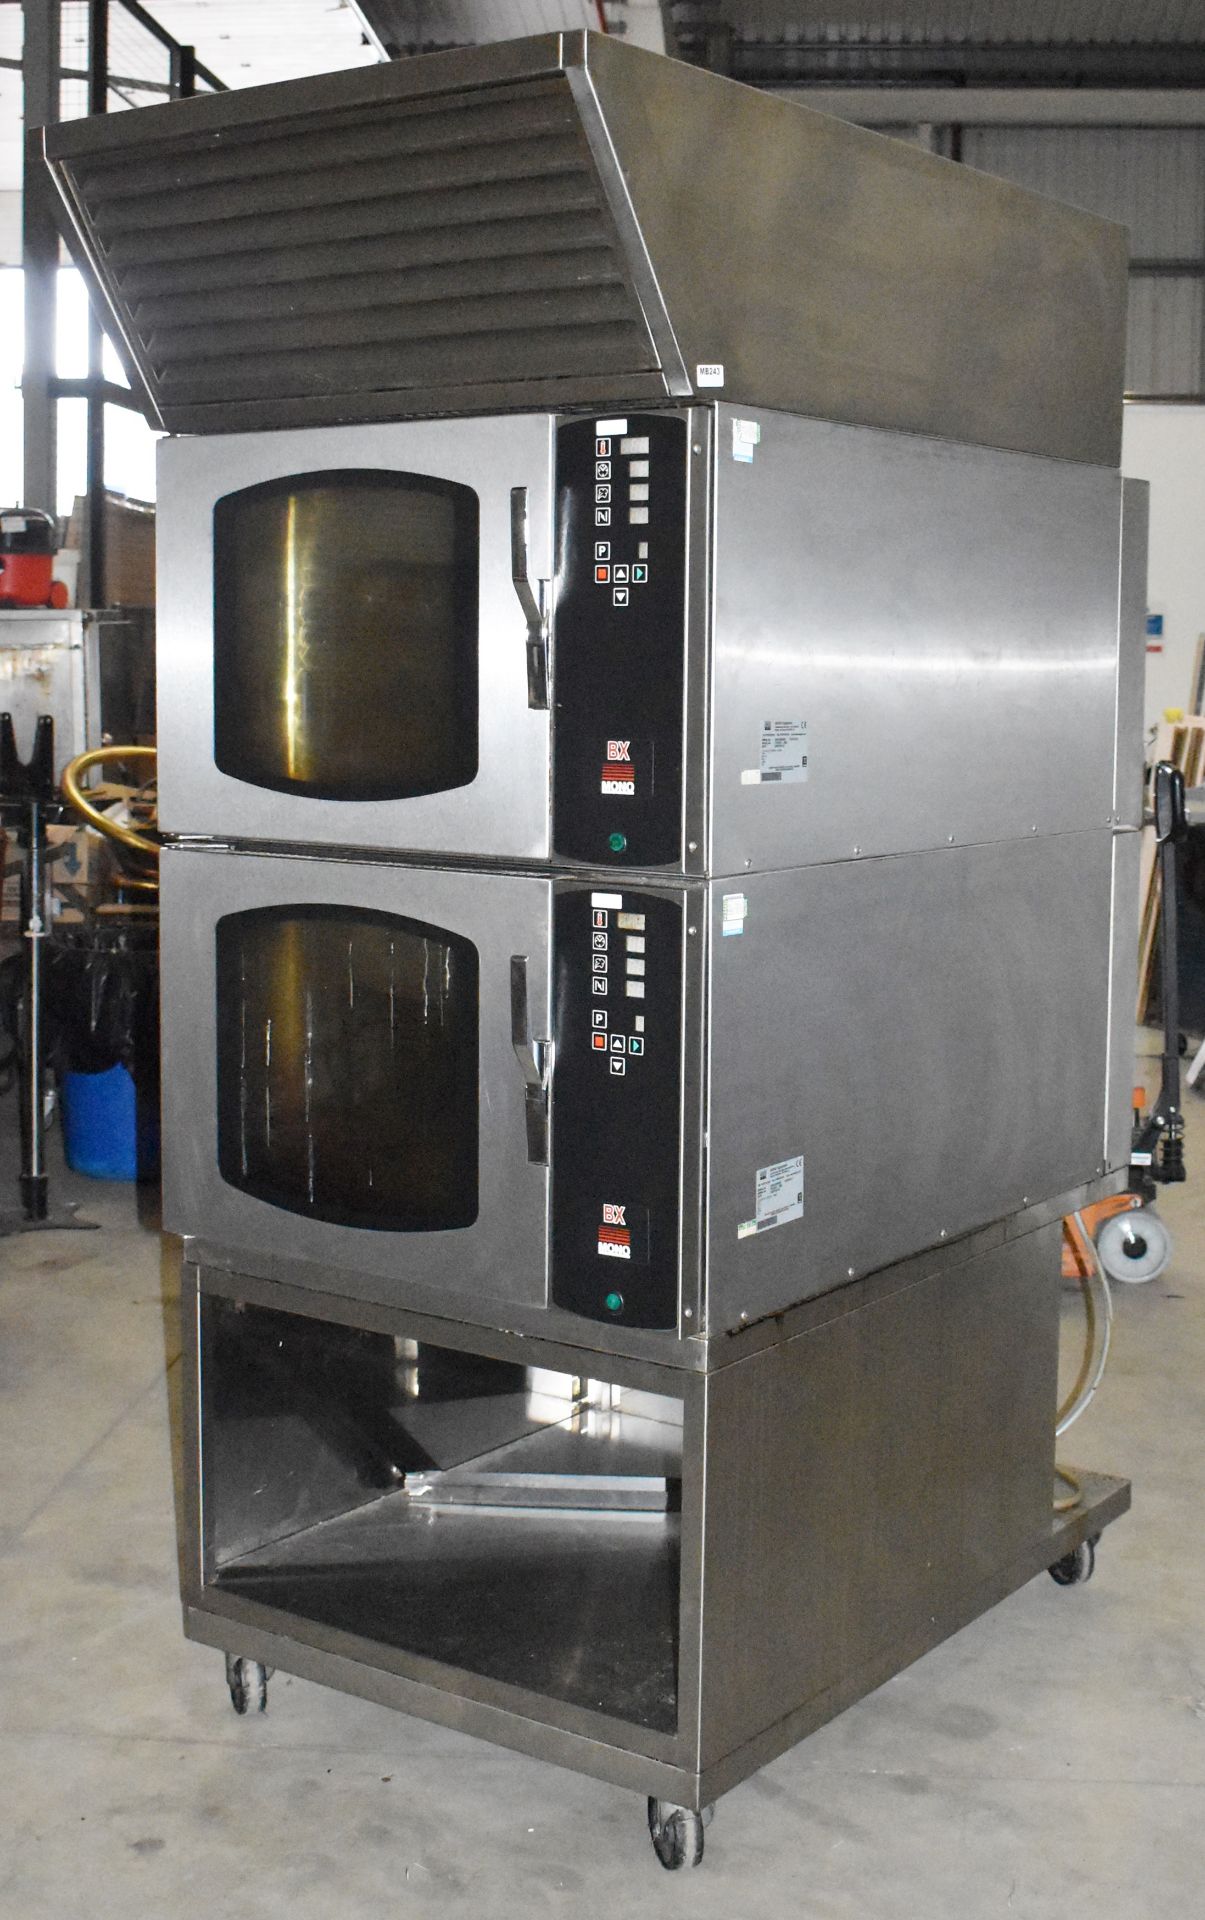 1 x Mono Double Classic and Steam BX Convection Oven - Model FG159C - 3 Phase Power - H210 x W83 x - Image 12 of 15